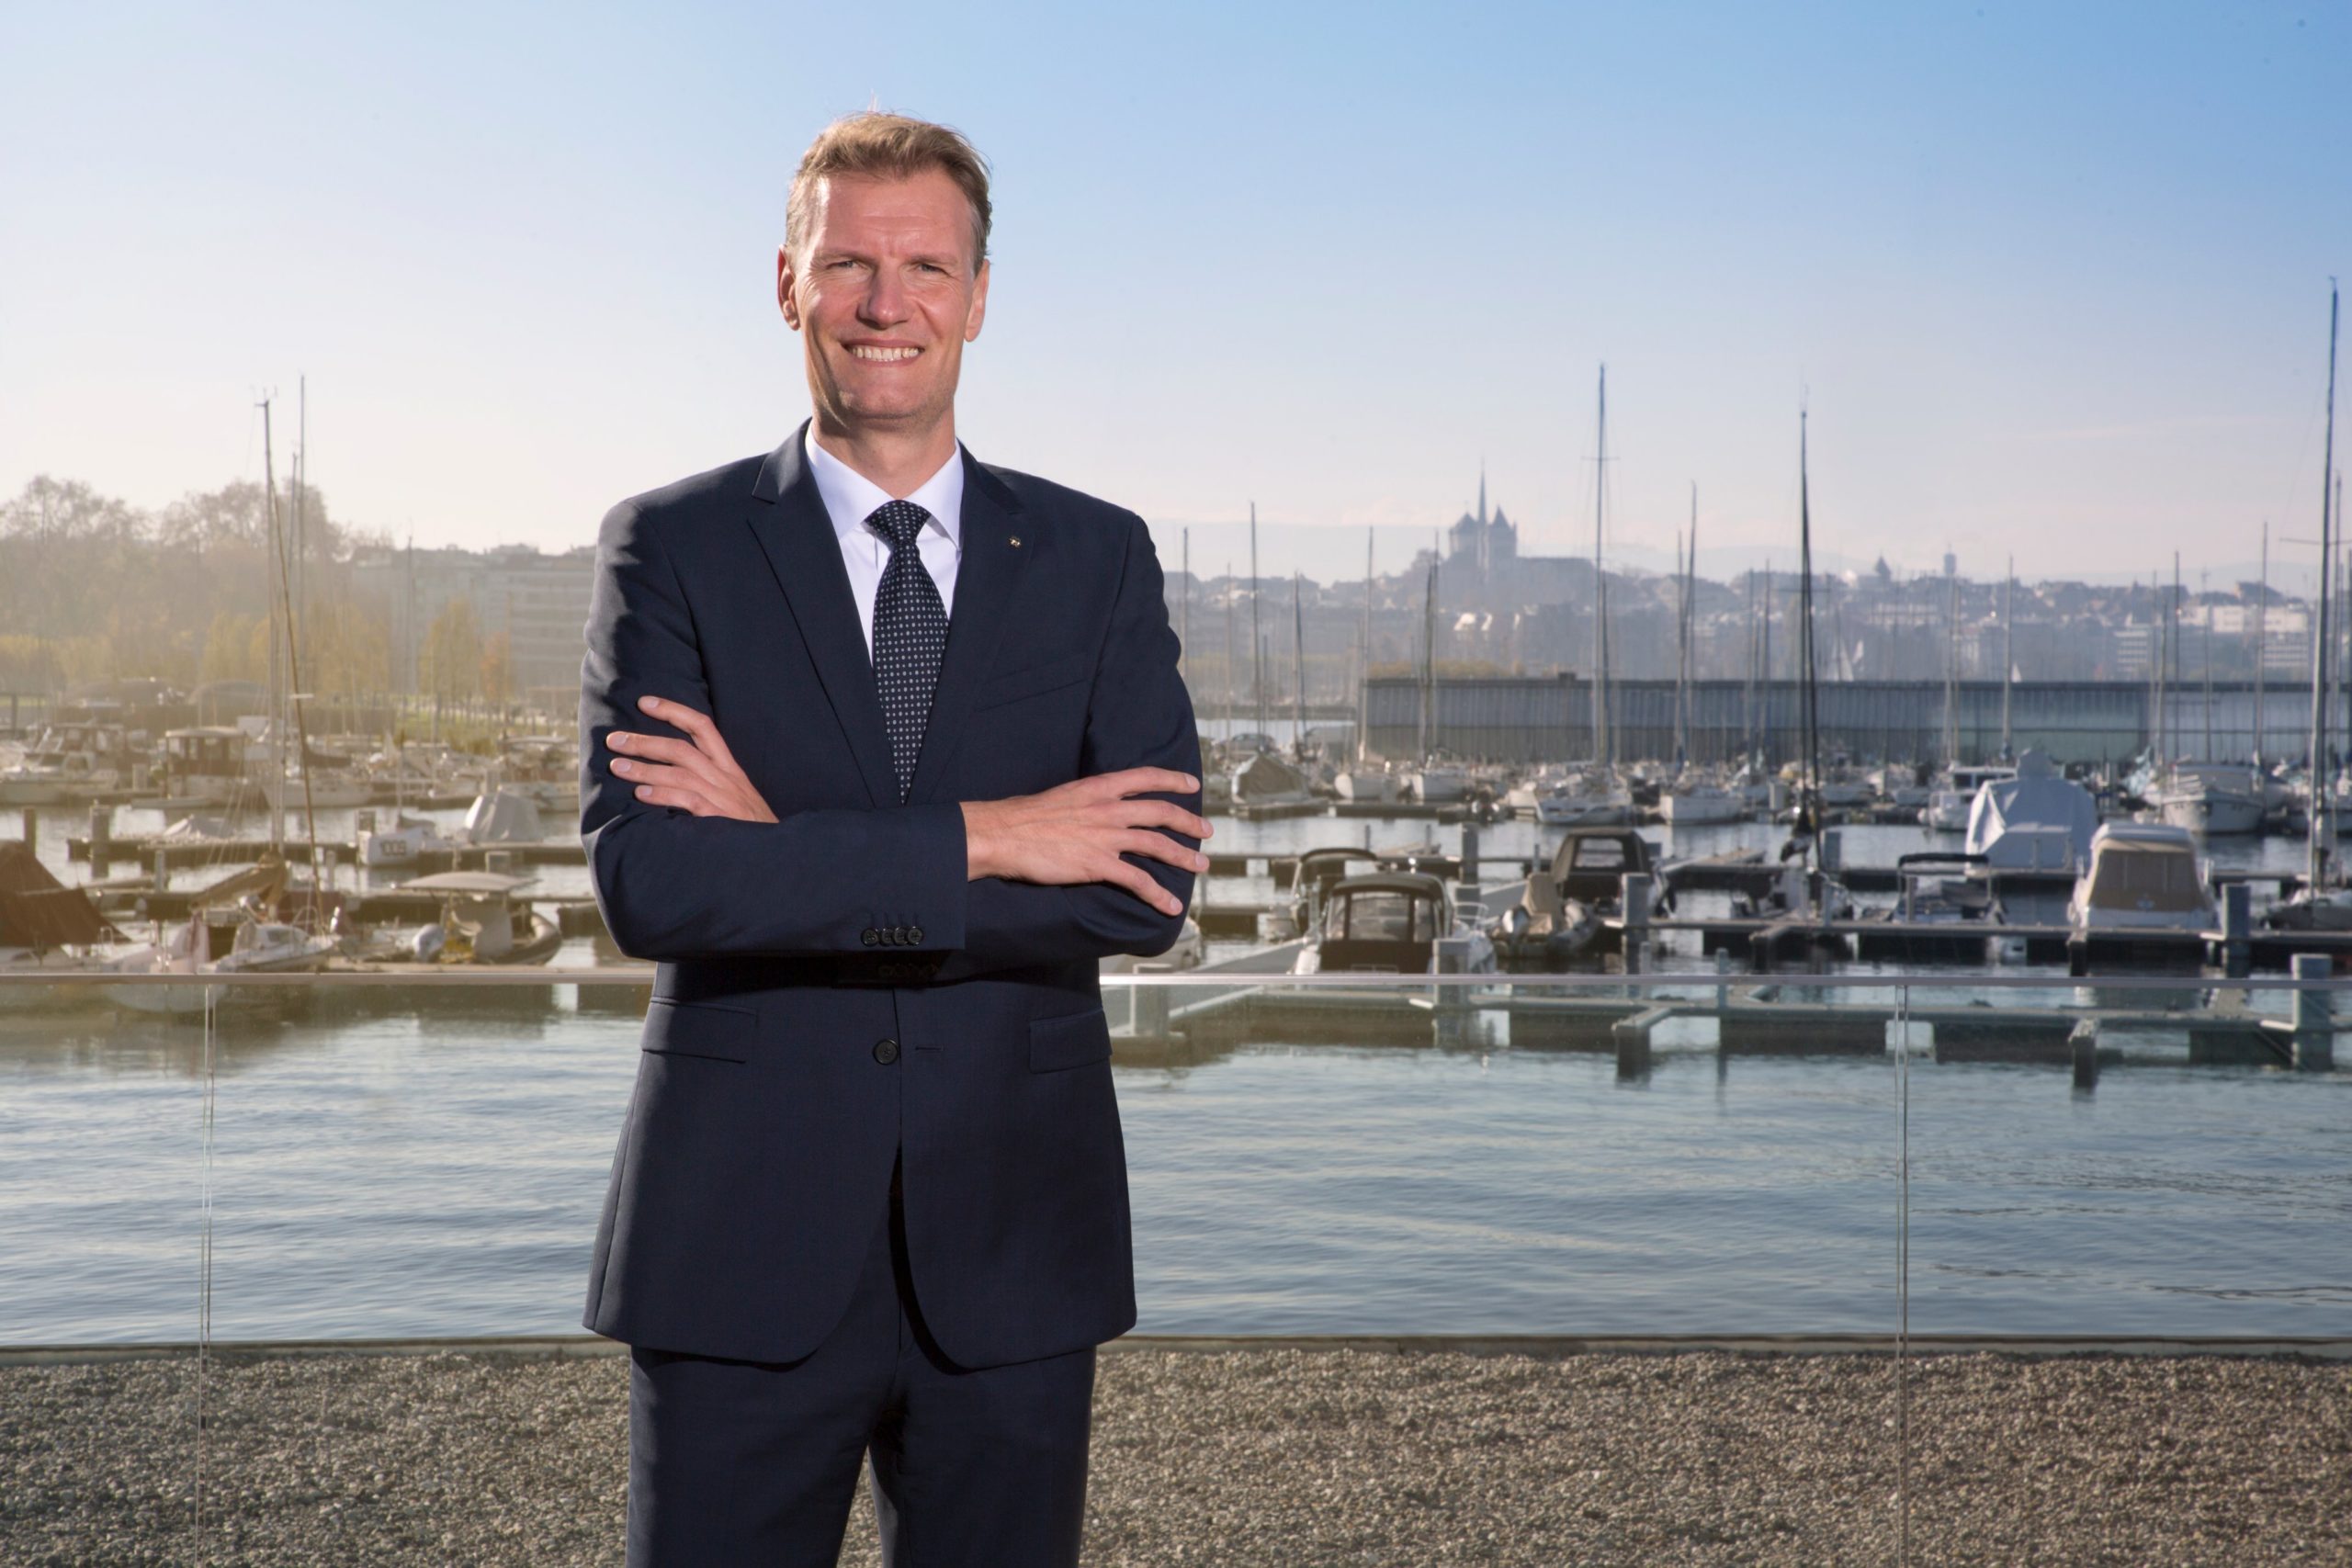 Soren Toft, Former Maersk Executive, Takes the Helm at MSC